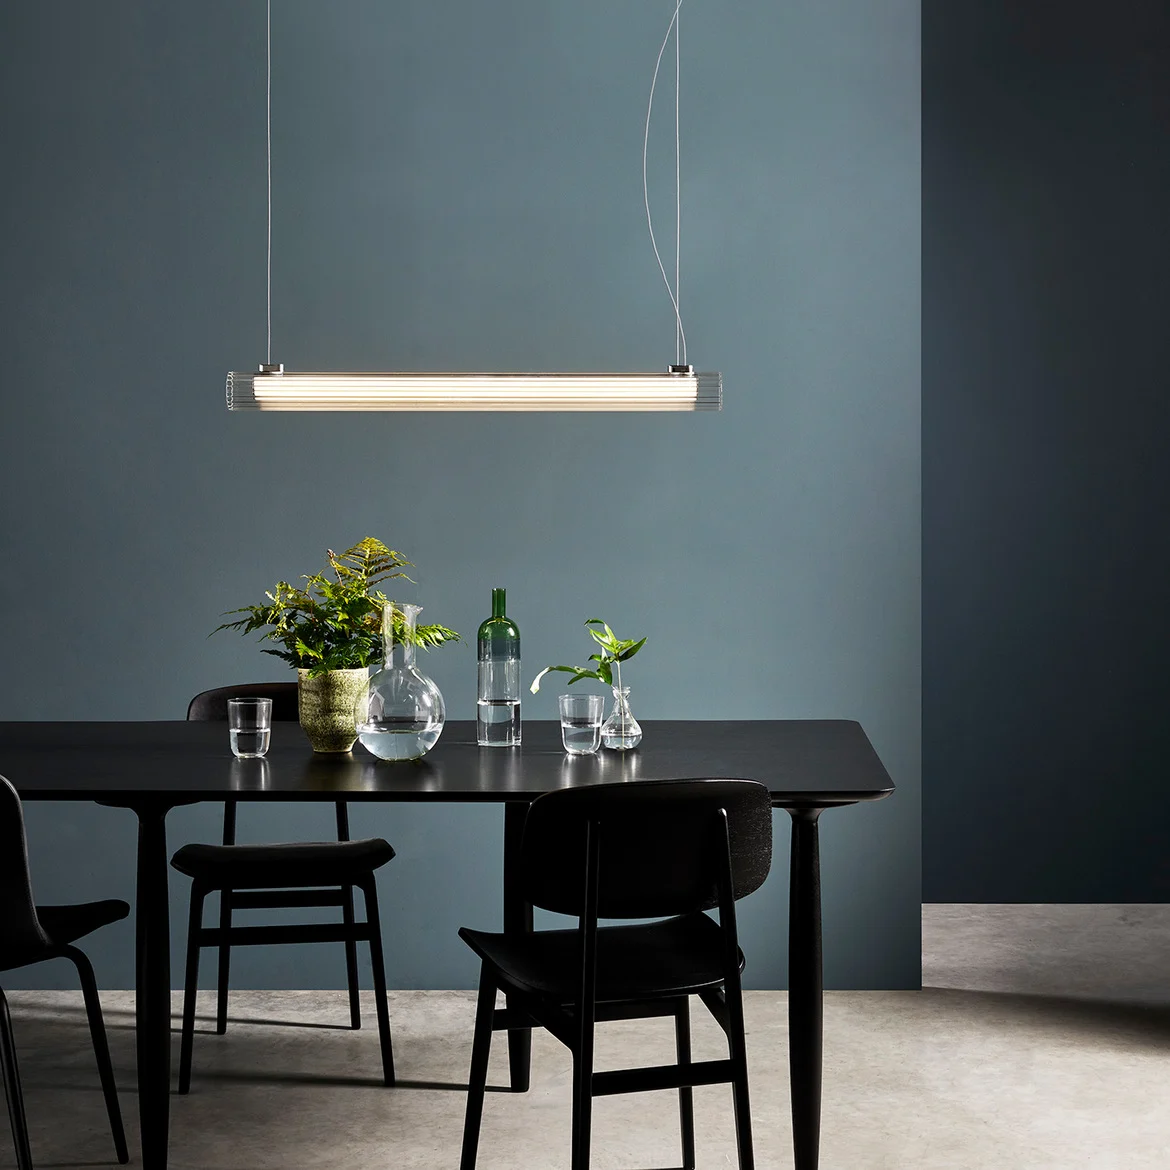 The io pendant light features a modern cylindrical design with ribbed glass and detailing in a polished chrome finish. Shows the pendant hanging over a dining table.